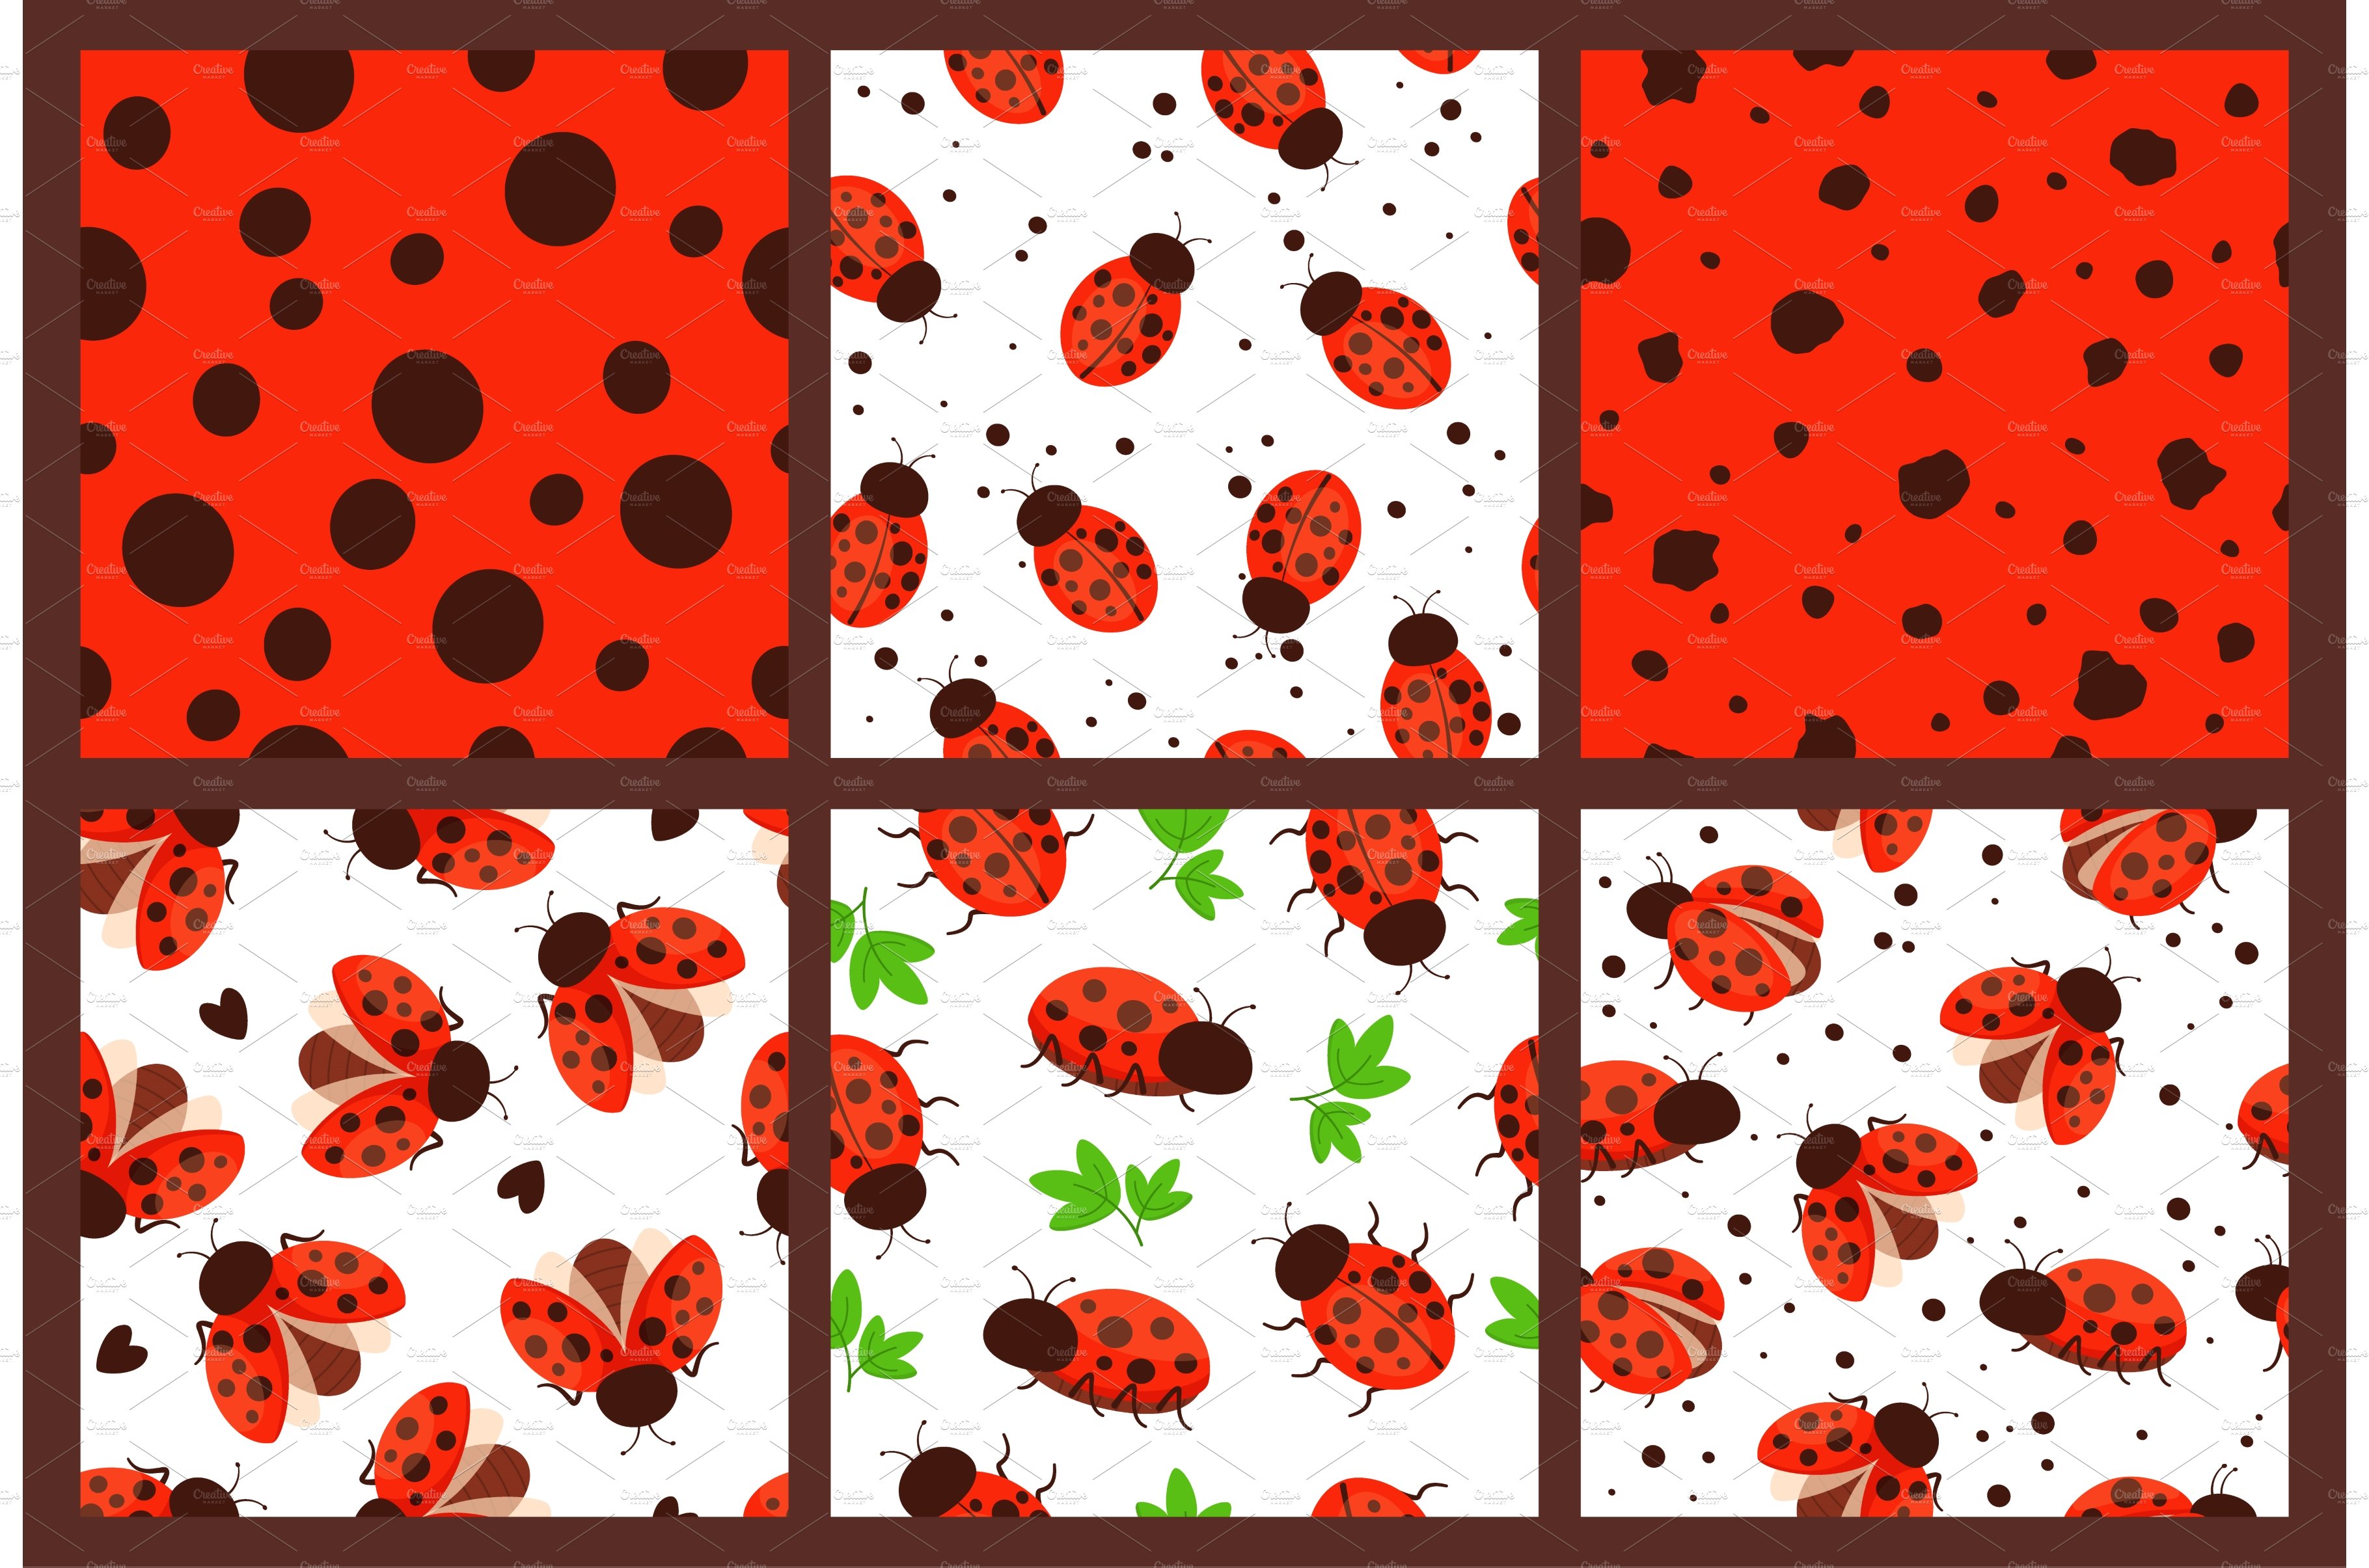 Ladybug patterns. Red dots texture cover image.